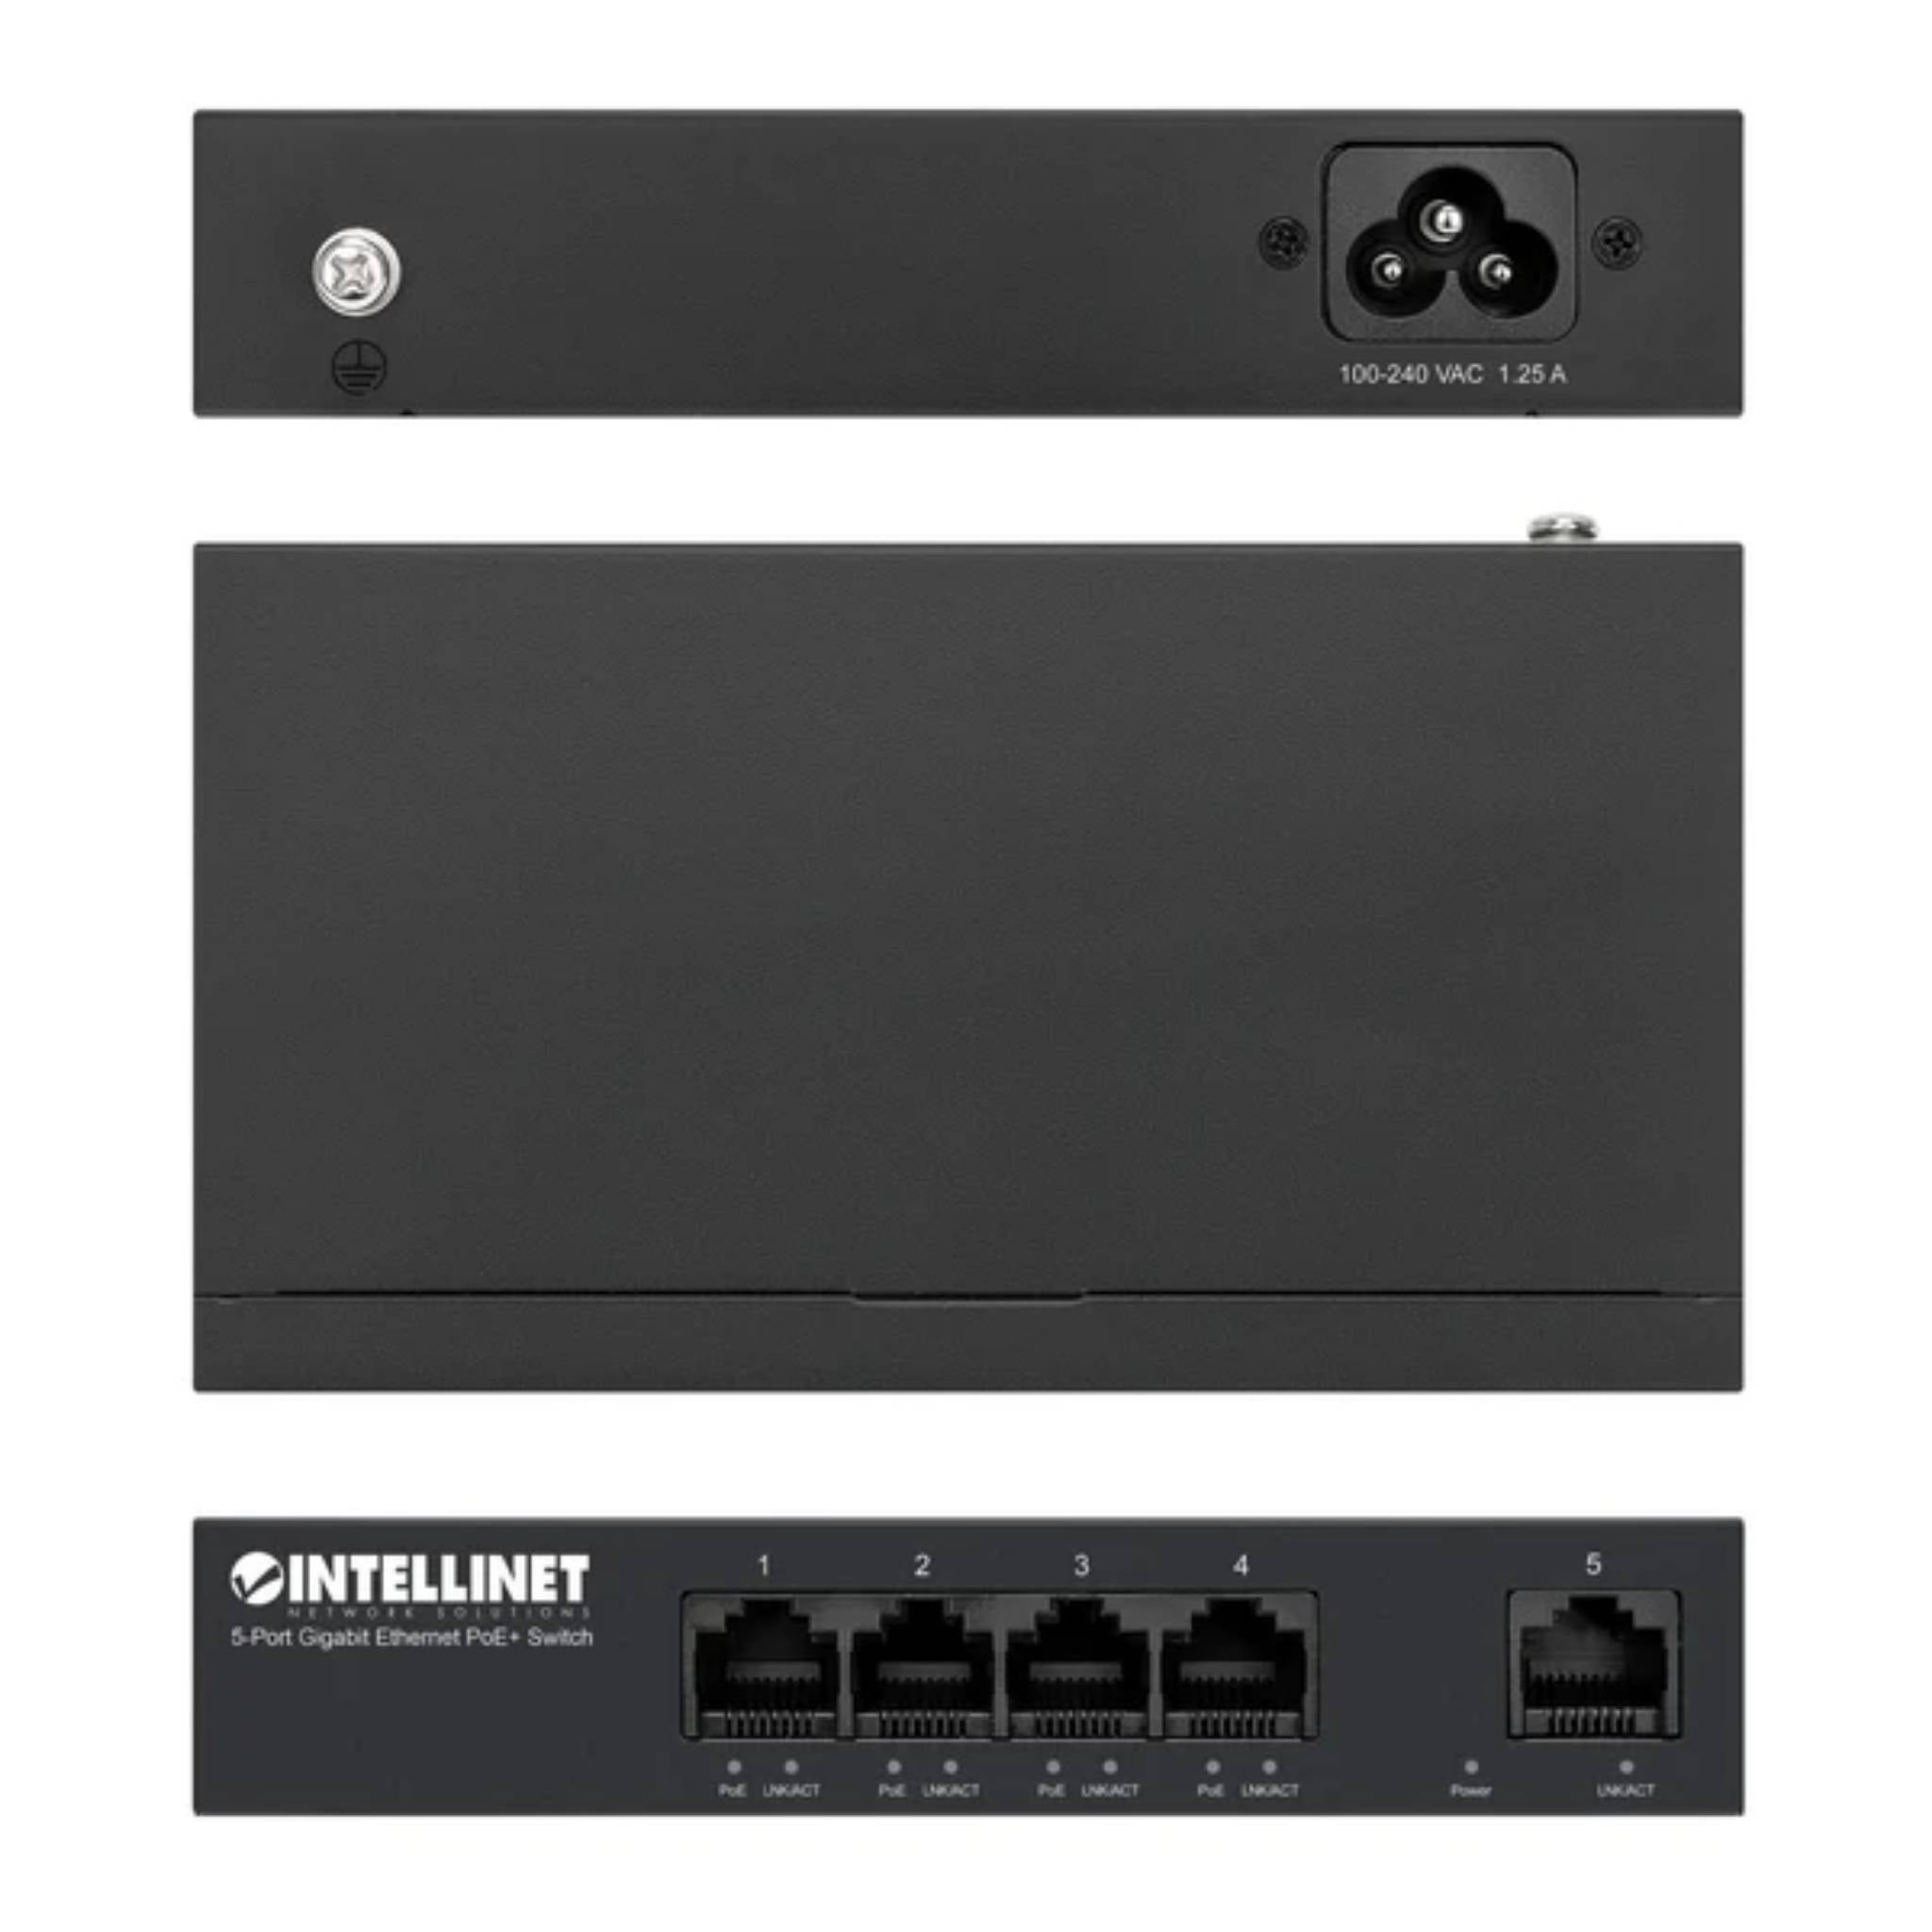 Intellinet 5-Port Gigabit PoE+ Switch: Fast Power over Ethernet Connectivity for Efficient Networking